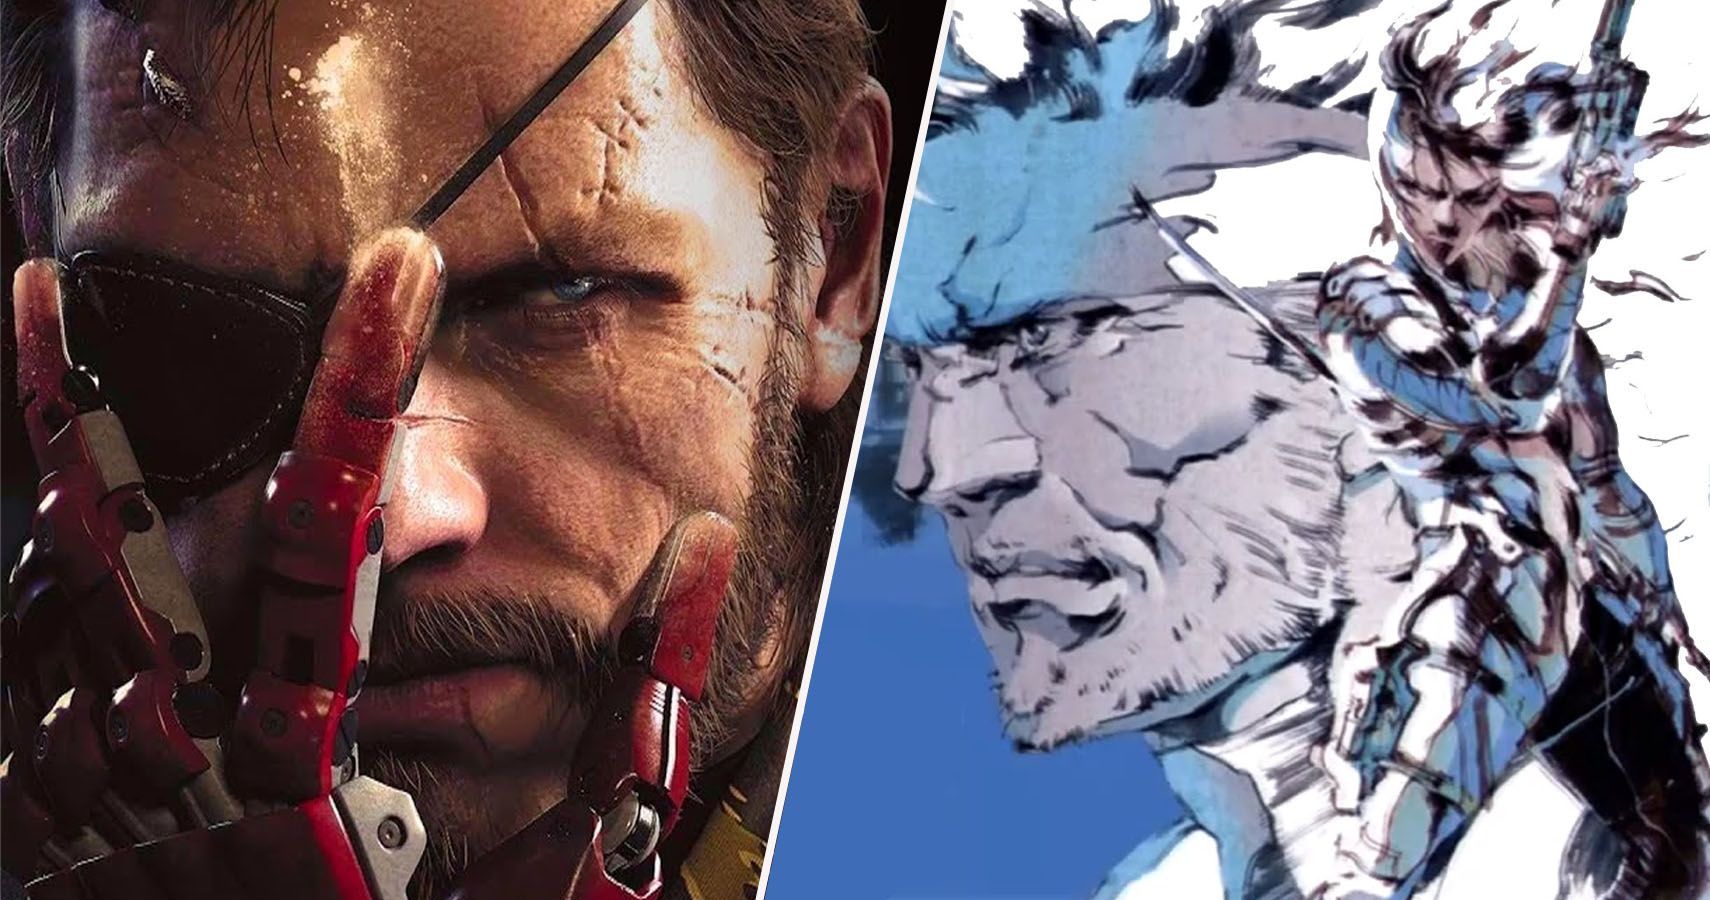 The 15 Best Metal Gear Solid Games, Ranked By Metacritic